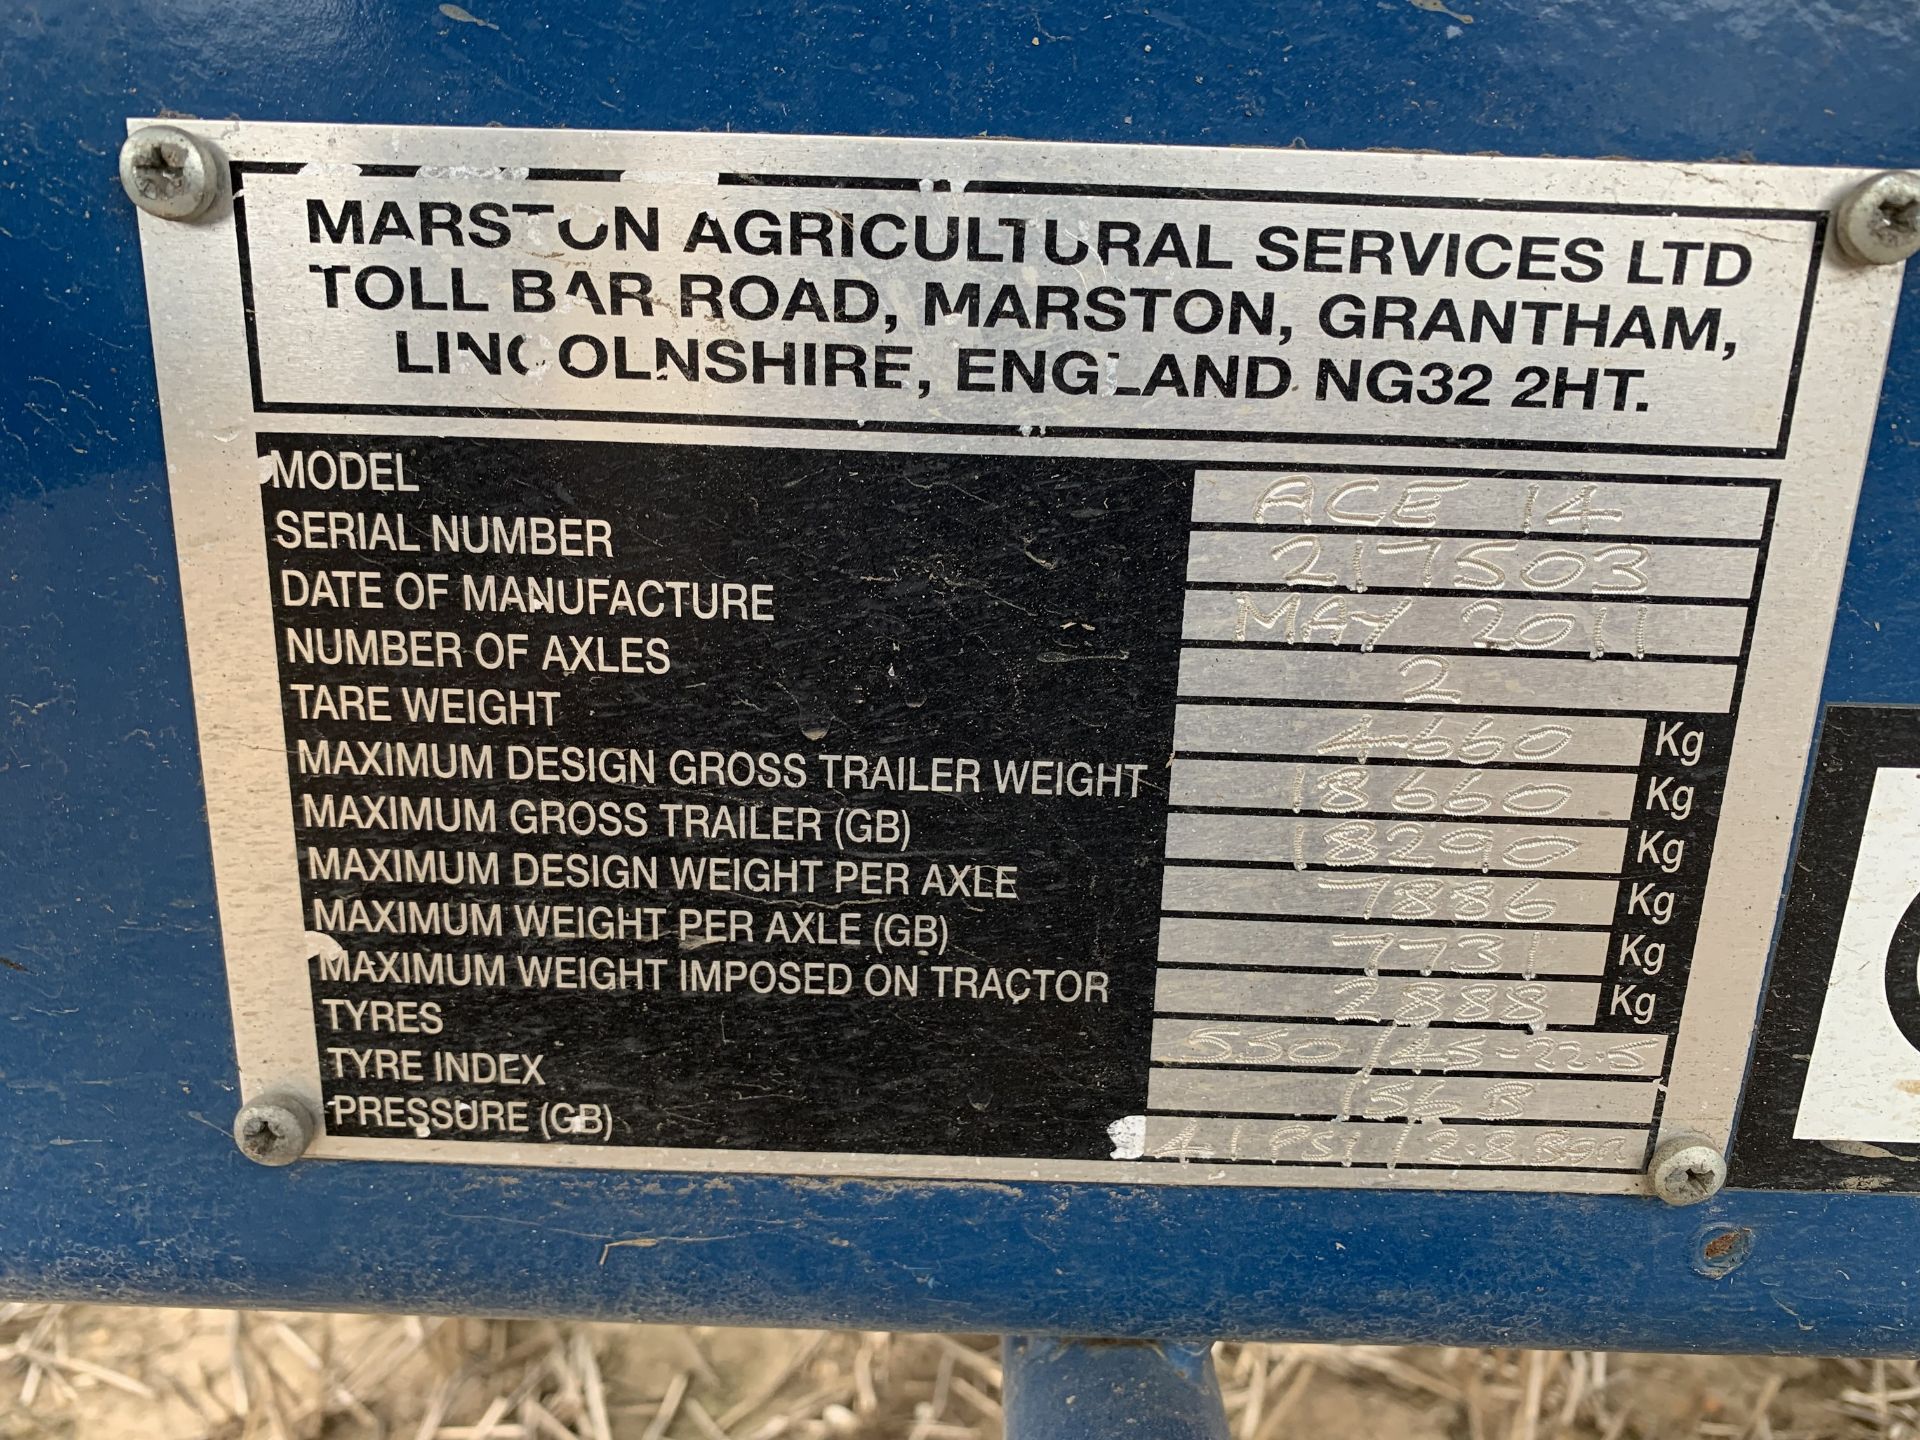 2011 Marston 14t twin axle grain trailer with roll over sheet - Image 2 of 4